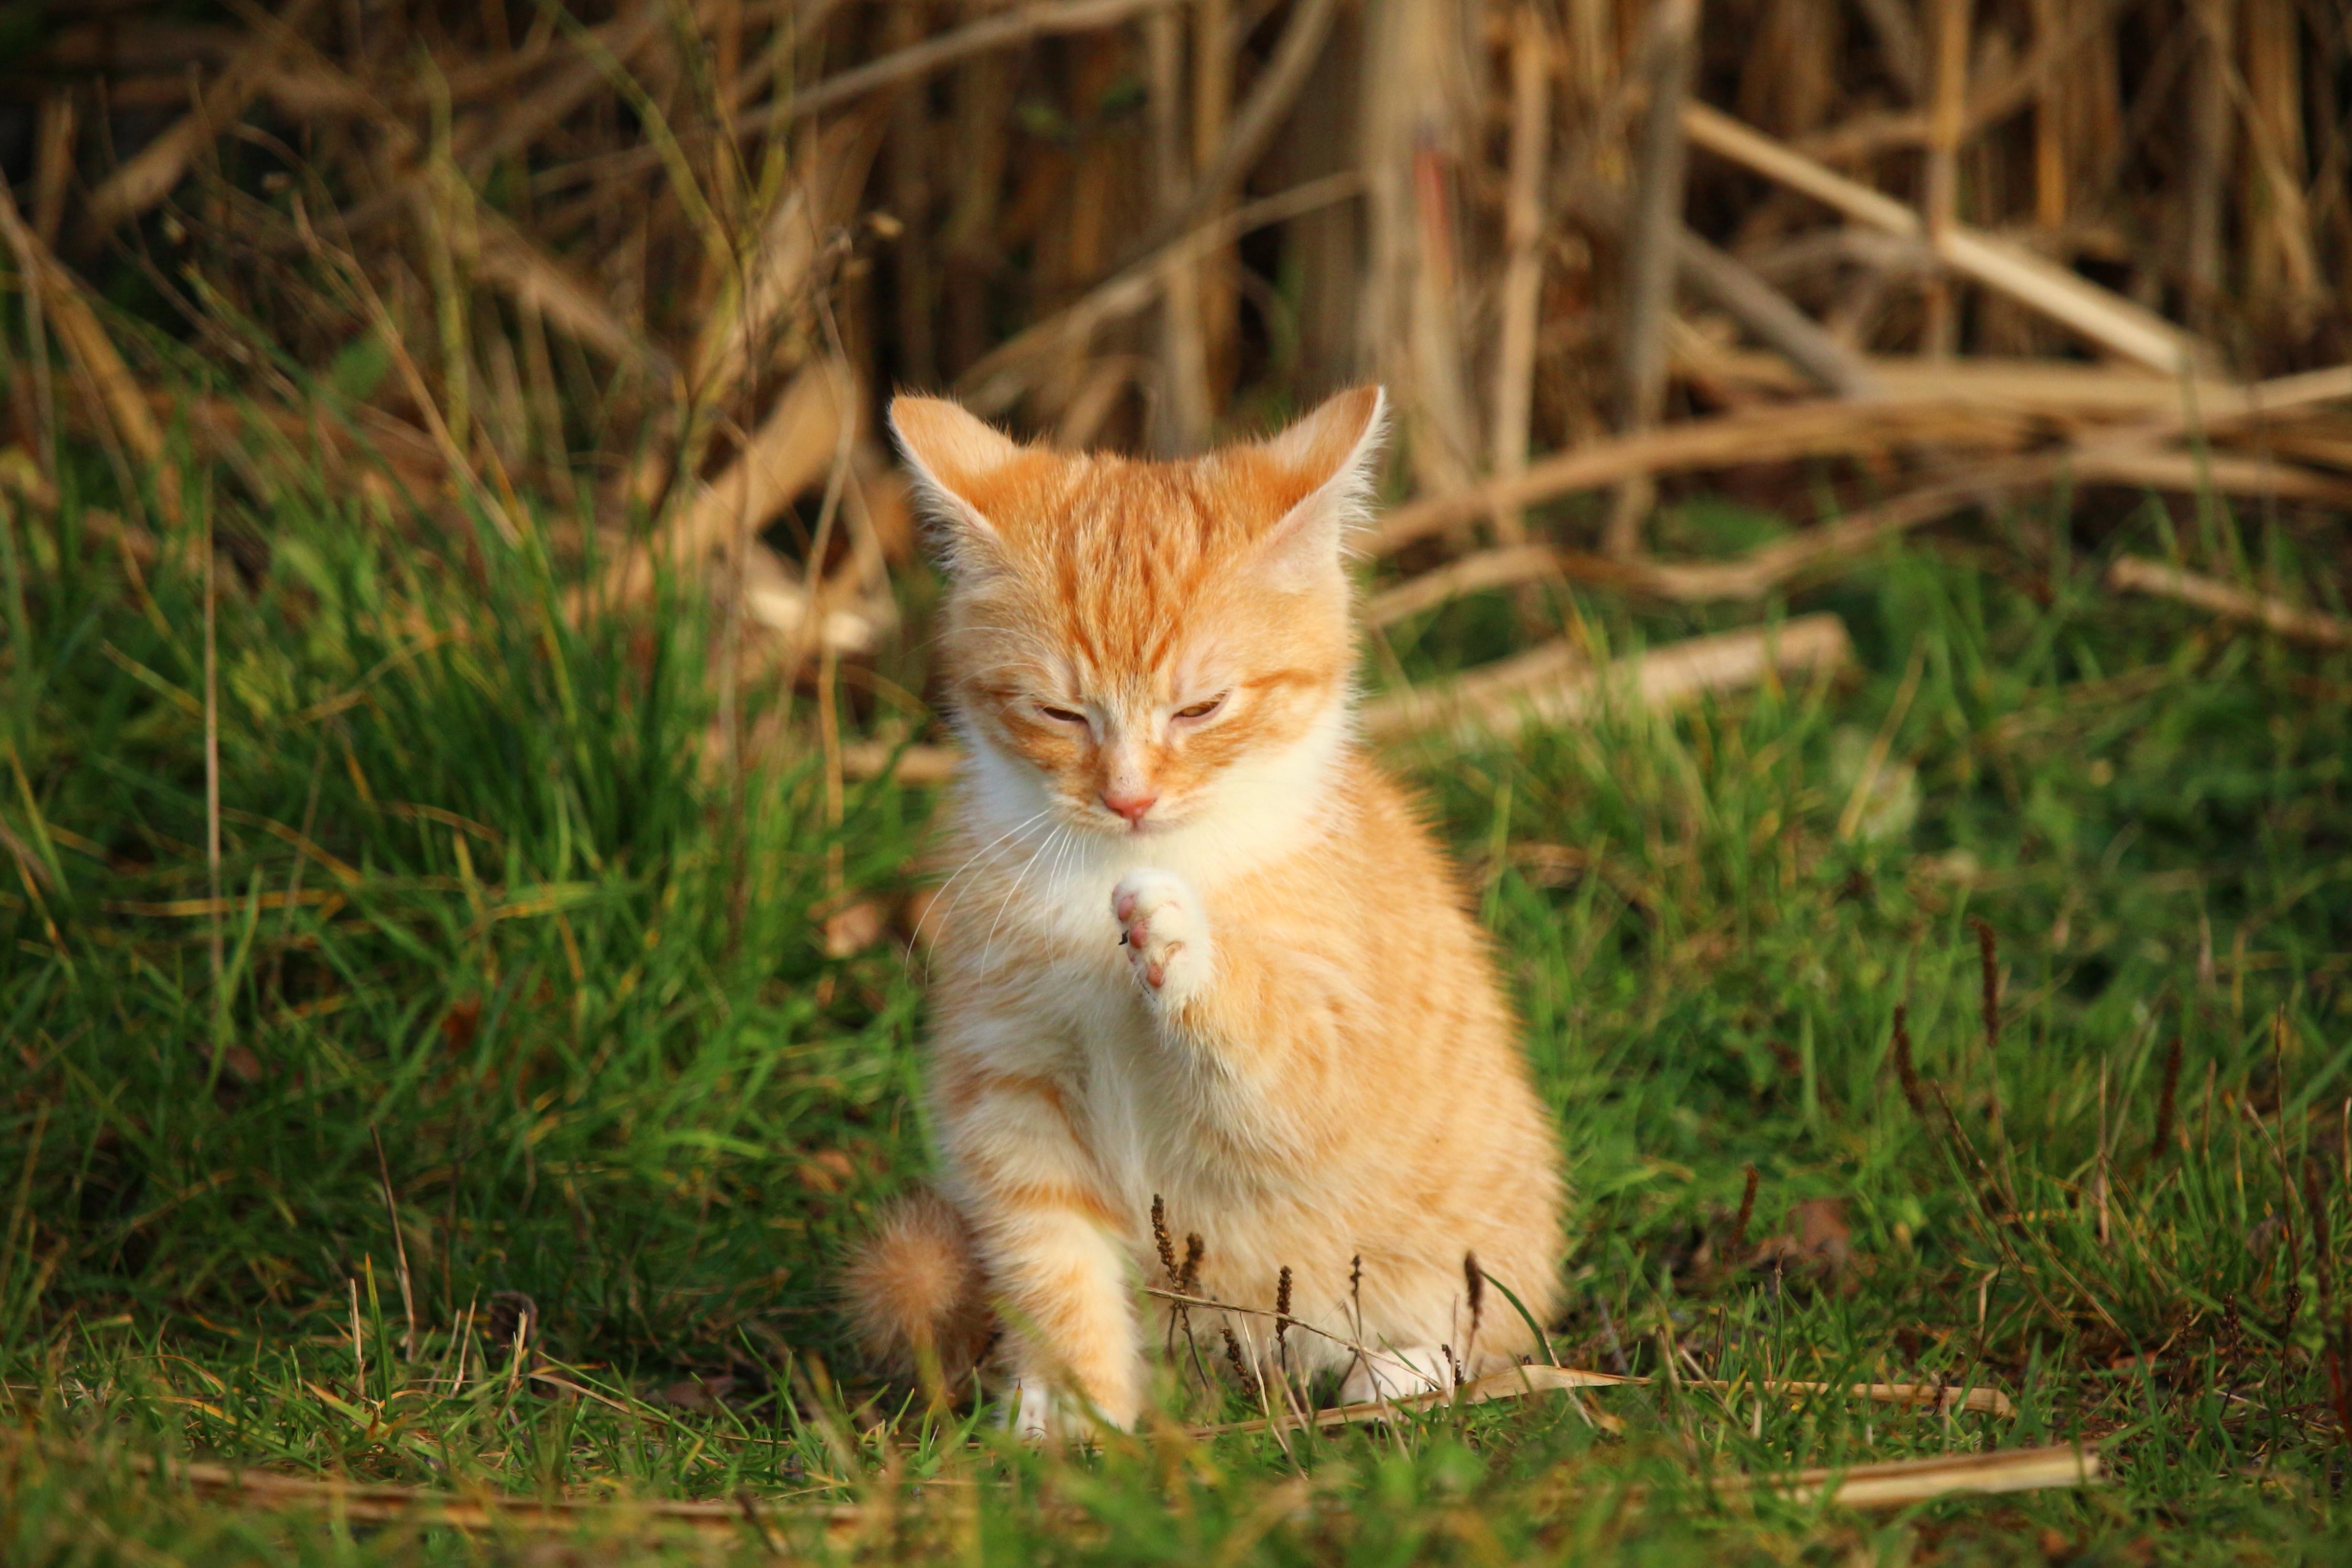 Free picture: cat, cute, animal, grass, nature, portrait, fur, eye, pet,  young, kitten, wildlife